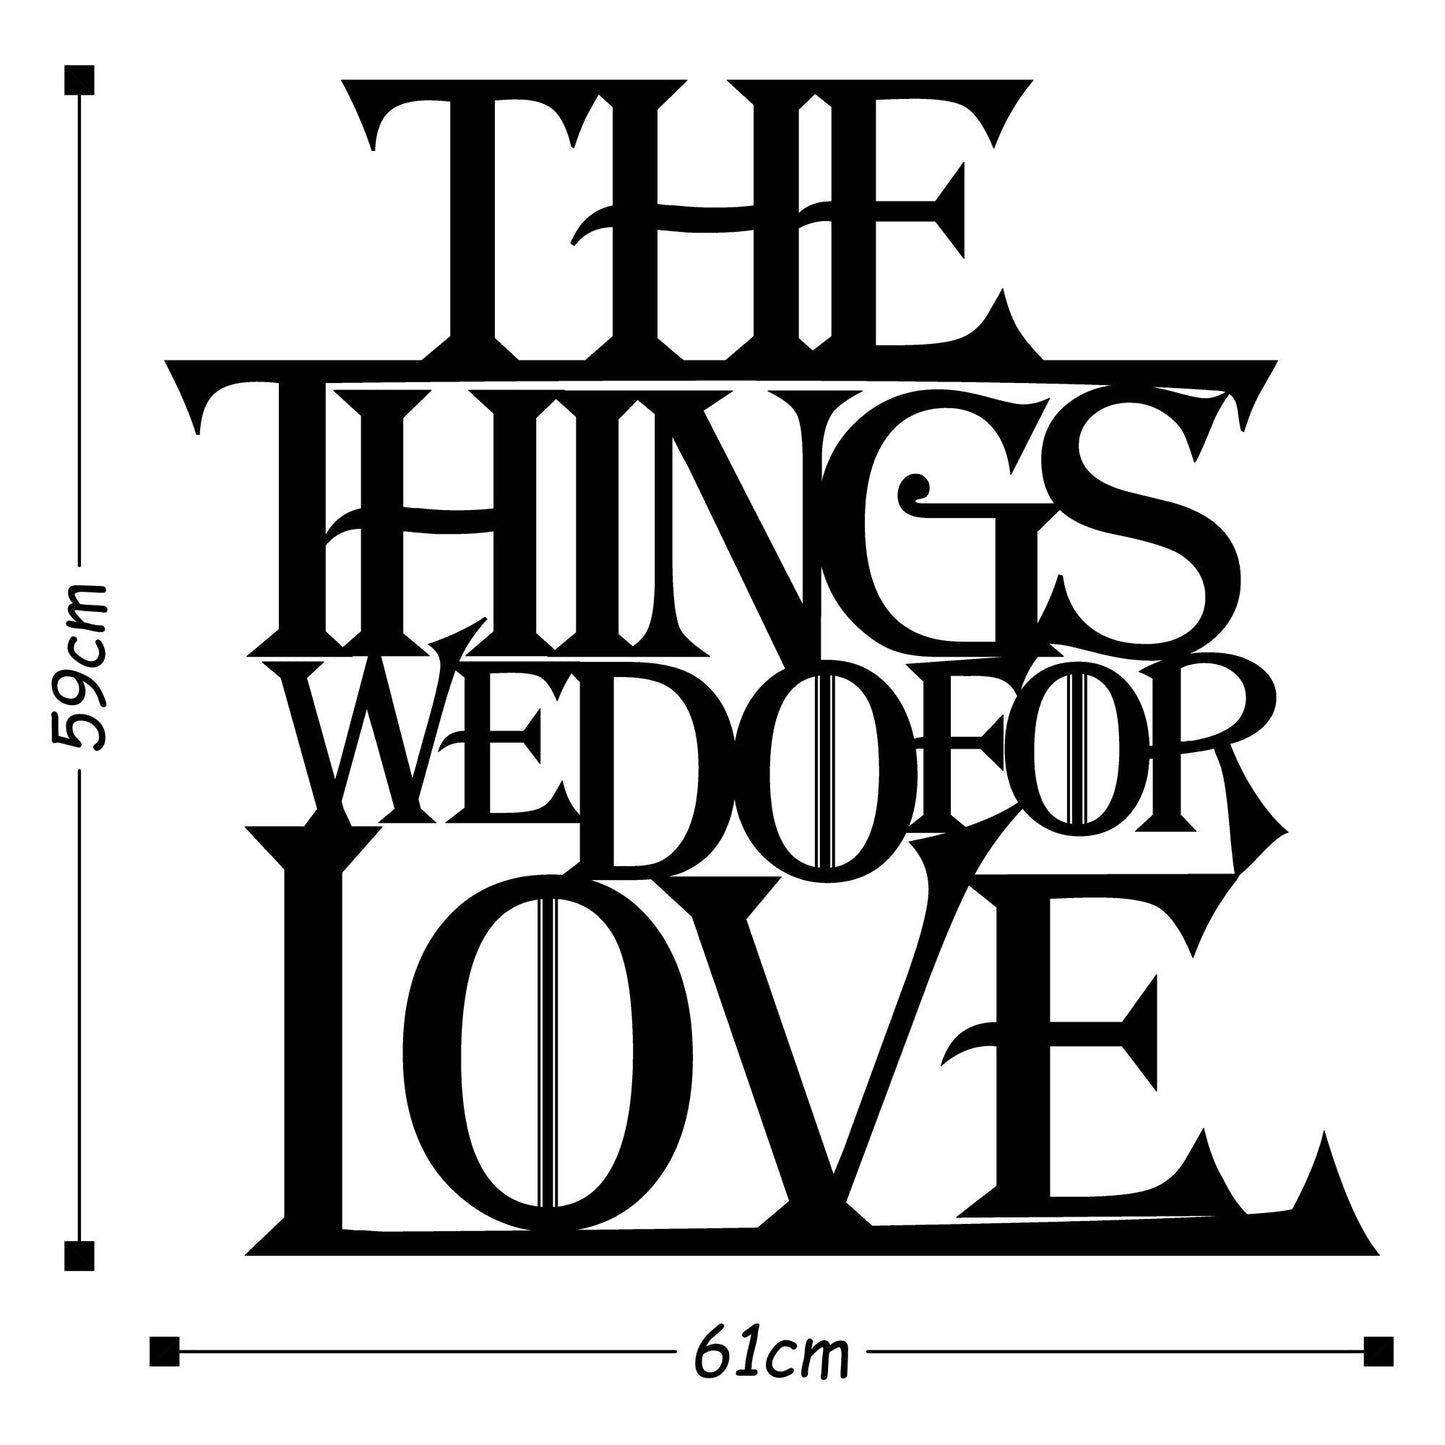 The Things We Do For Love - Decorative Metal Wall Accessory